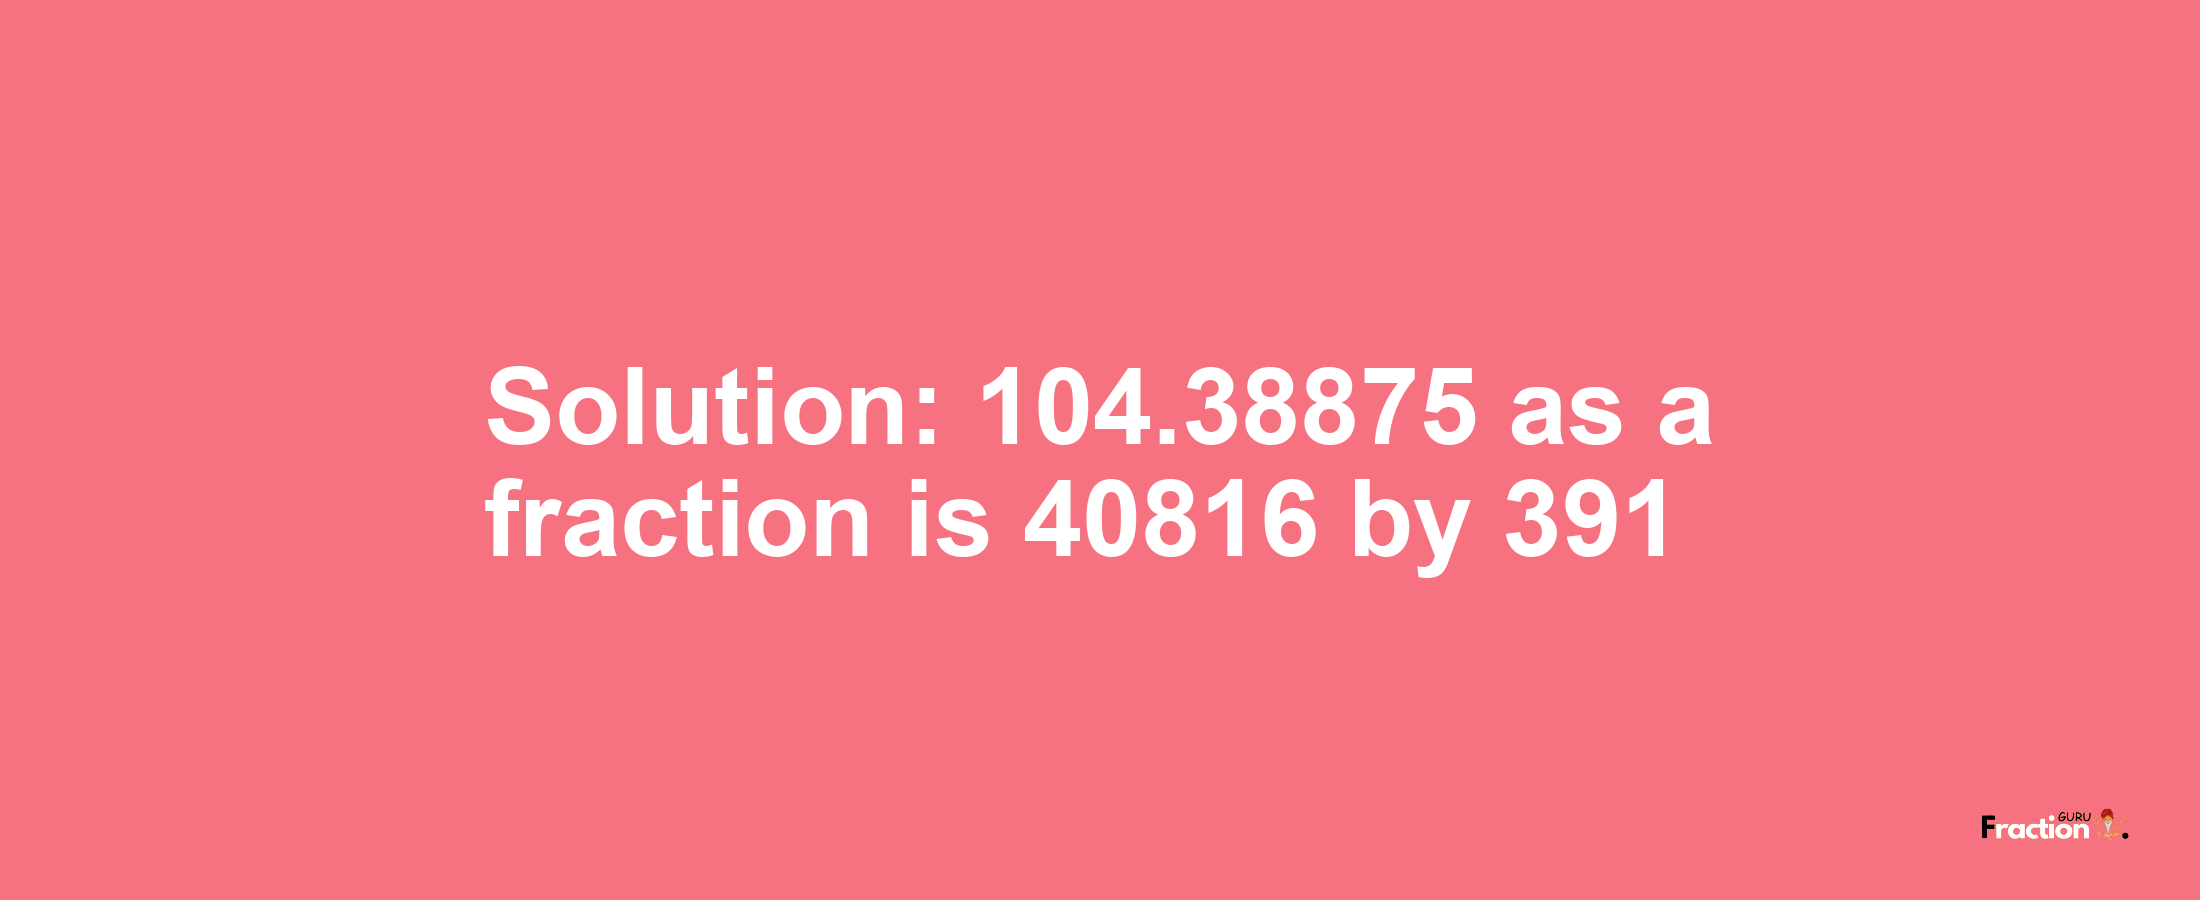 Solution:104.38875 as a fraction is 40816/391